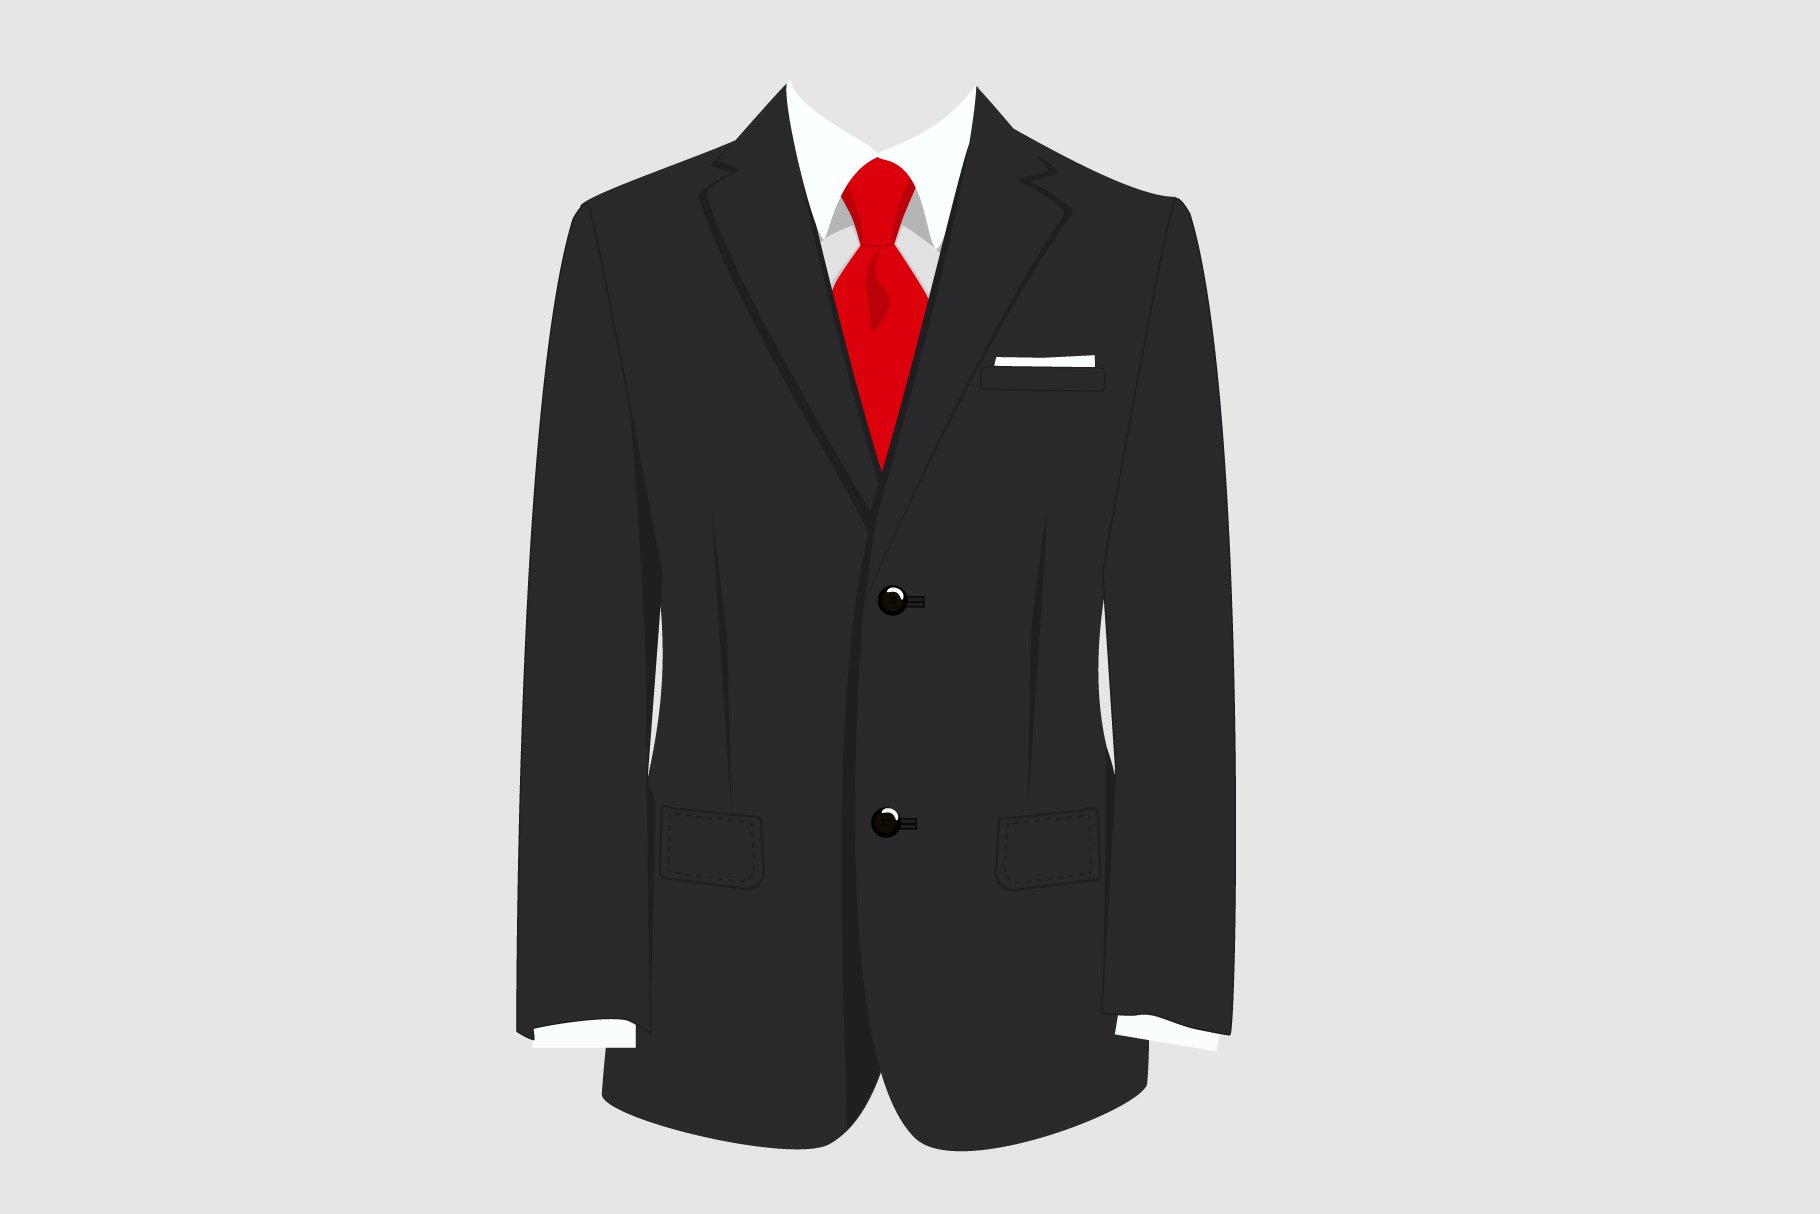 Portrait of a Mystical Stylish Male in a Black Suit and Red Tie. Isolated  on a Dark Background. Stock Image - Image of person, haircut: 118894857